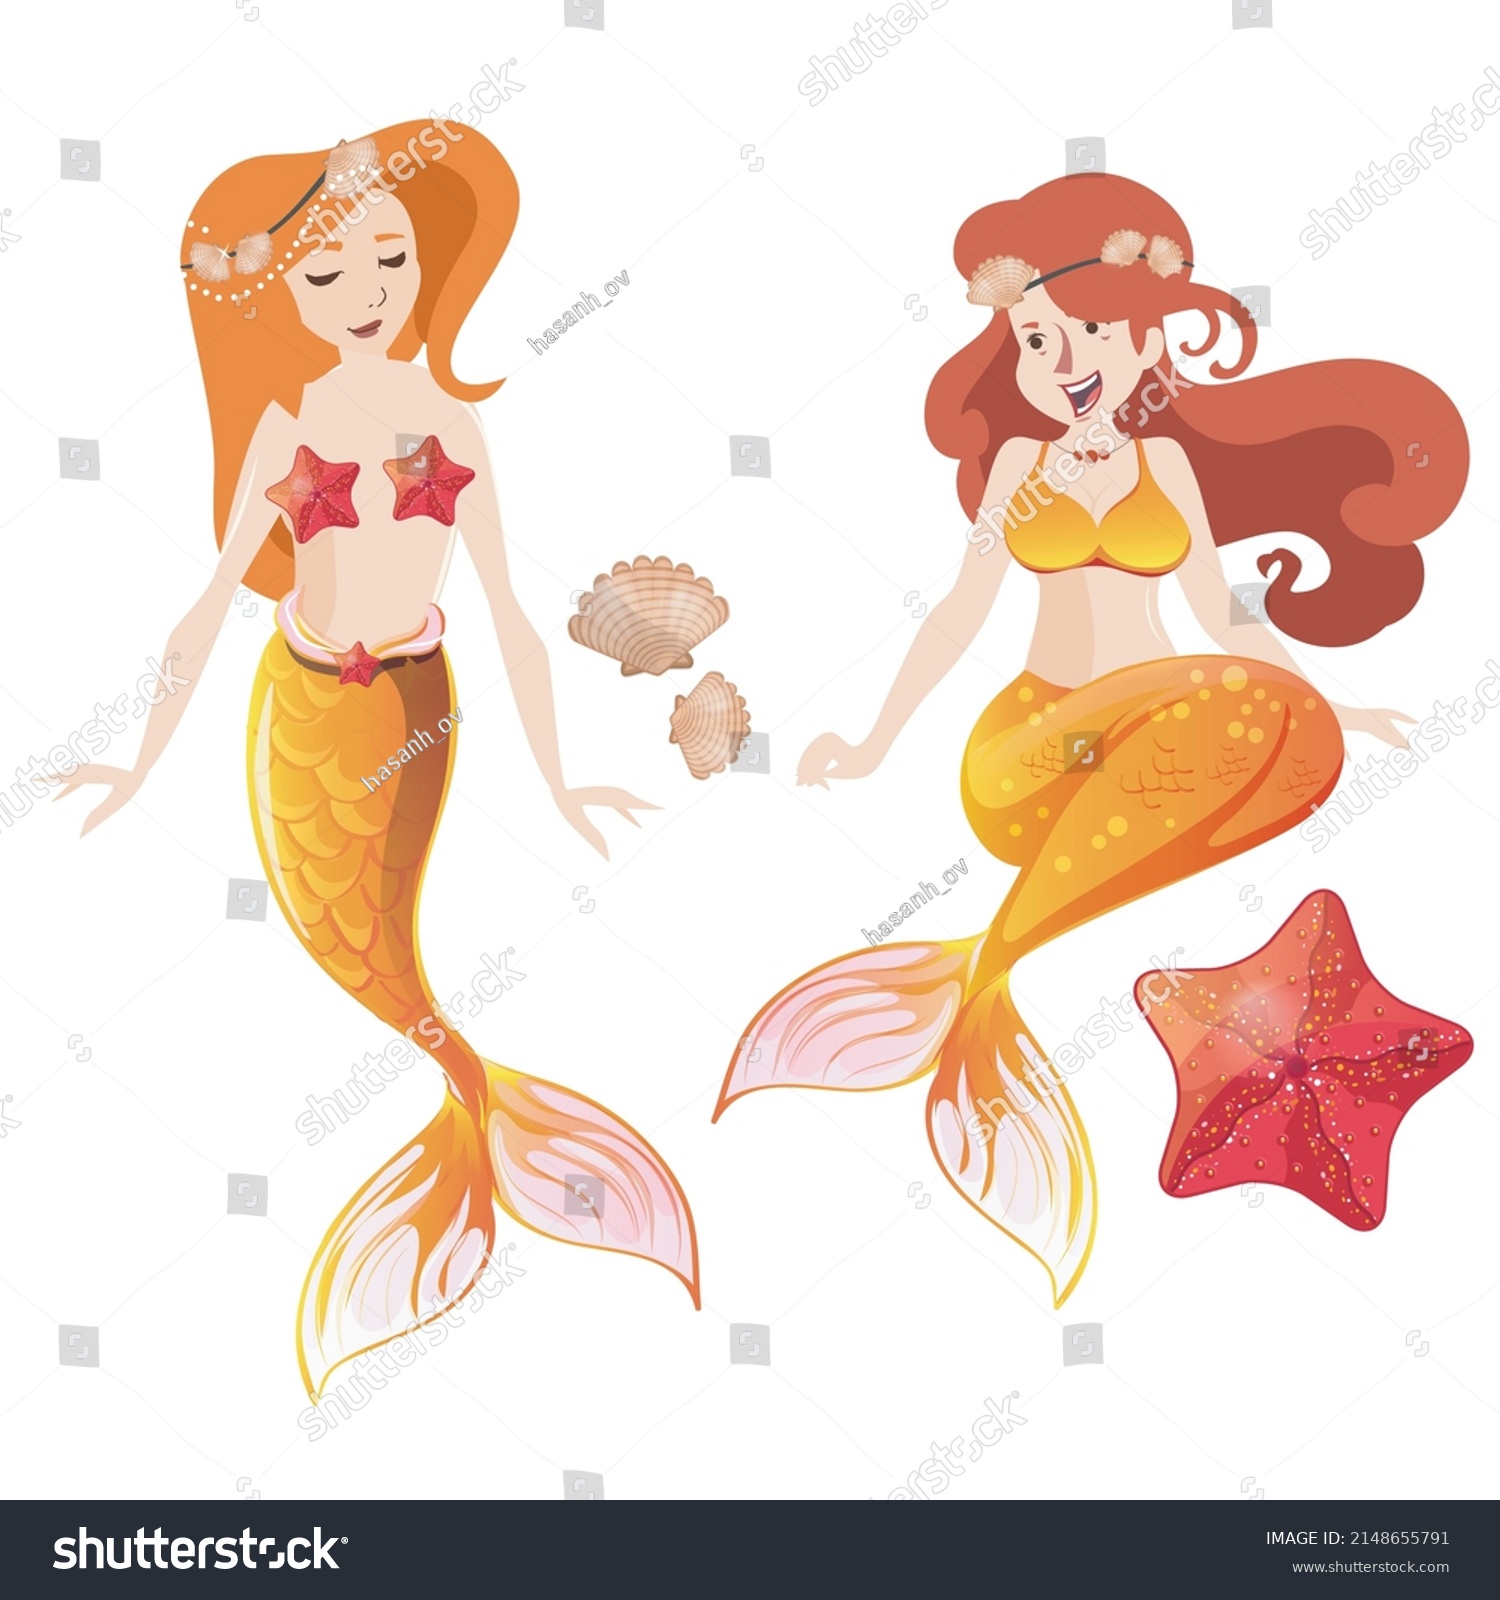 SVG of Mermaid icons cute girls sketch cartoon characters design SVG svg